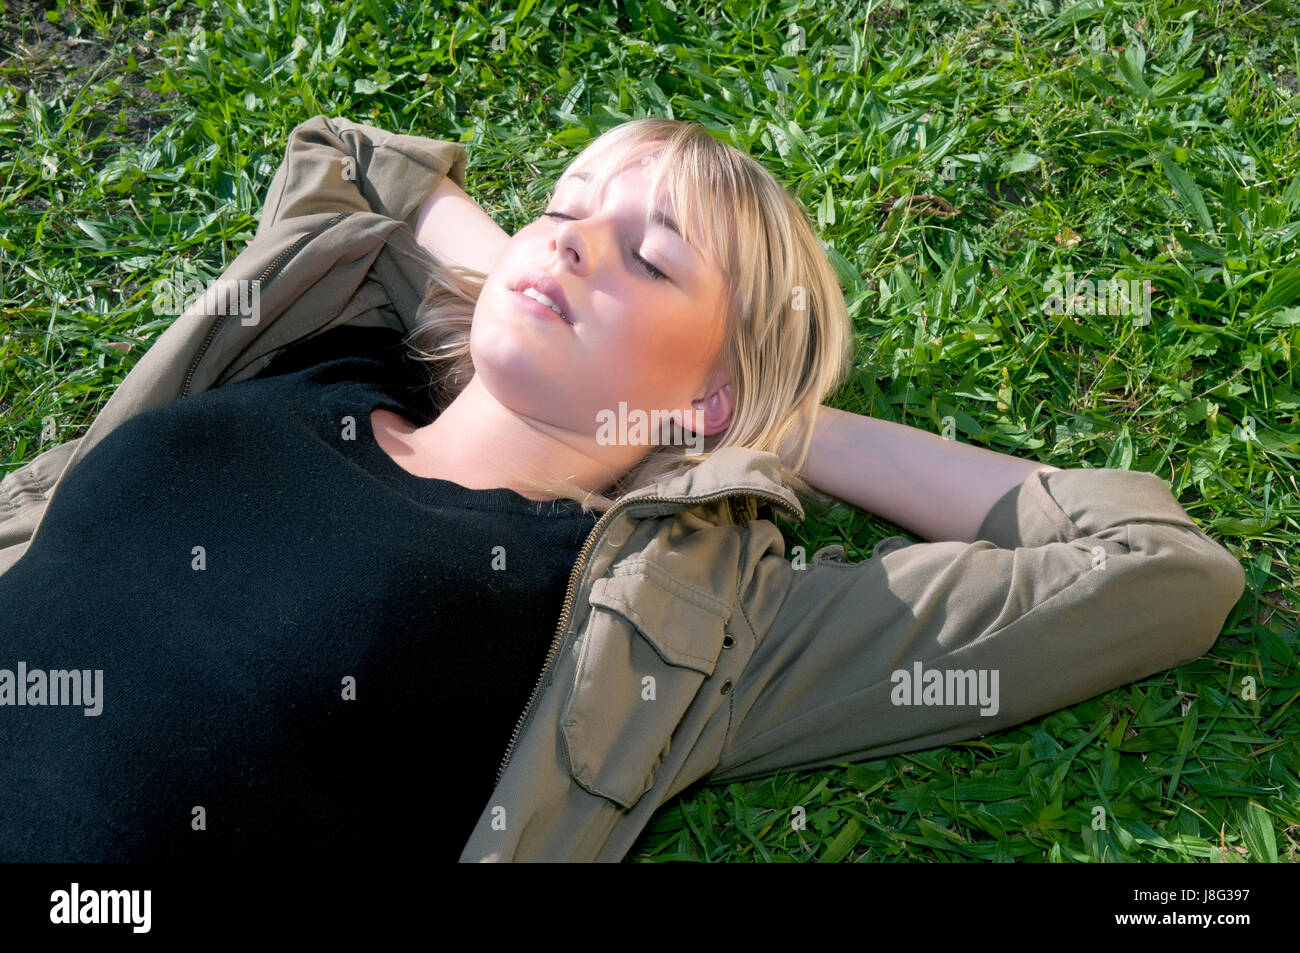 young woman lying on a meadow Stock Photo